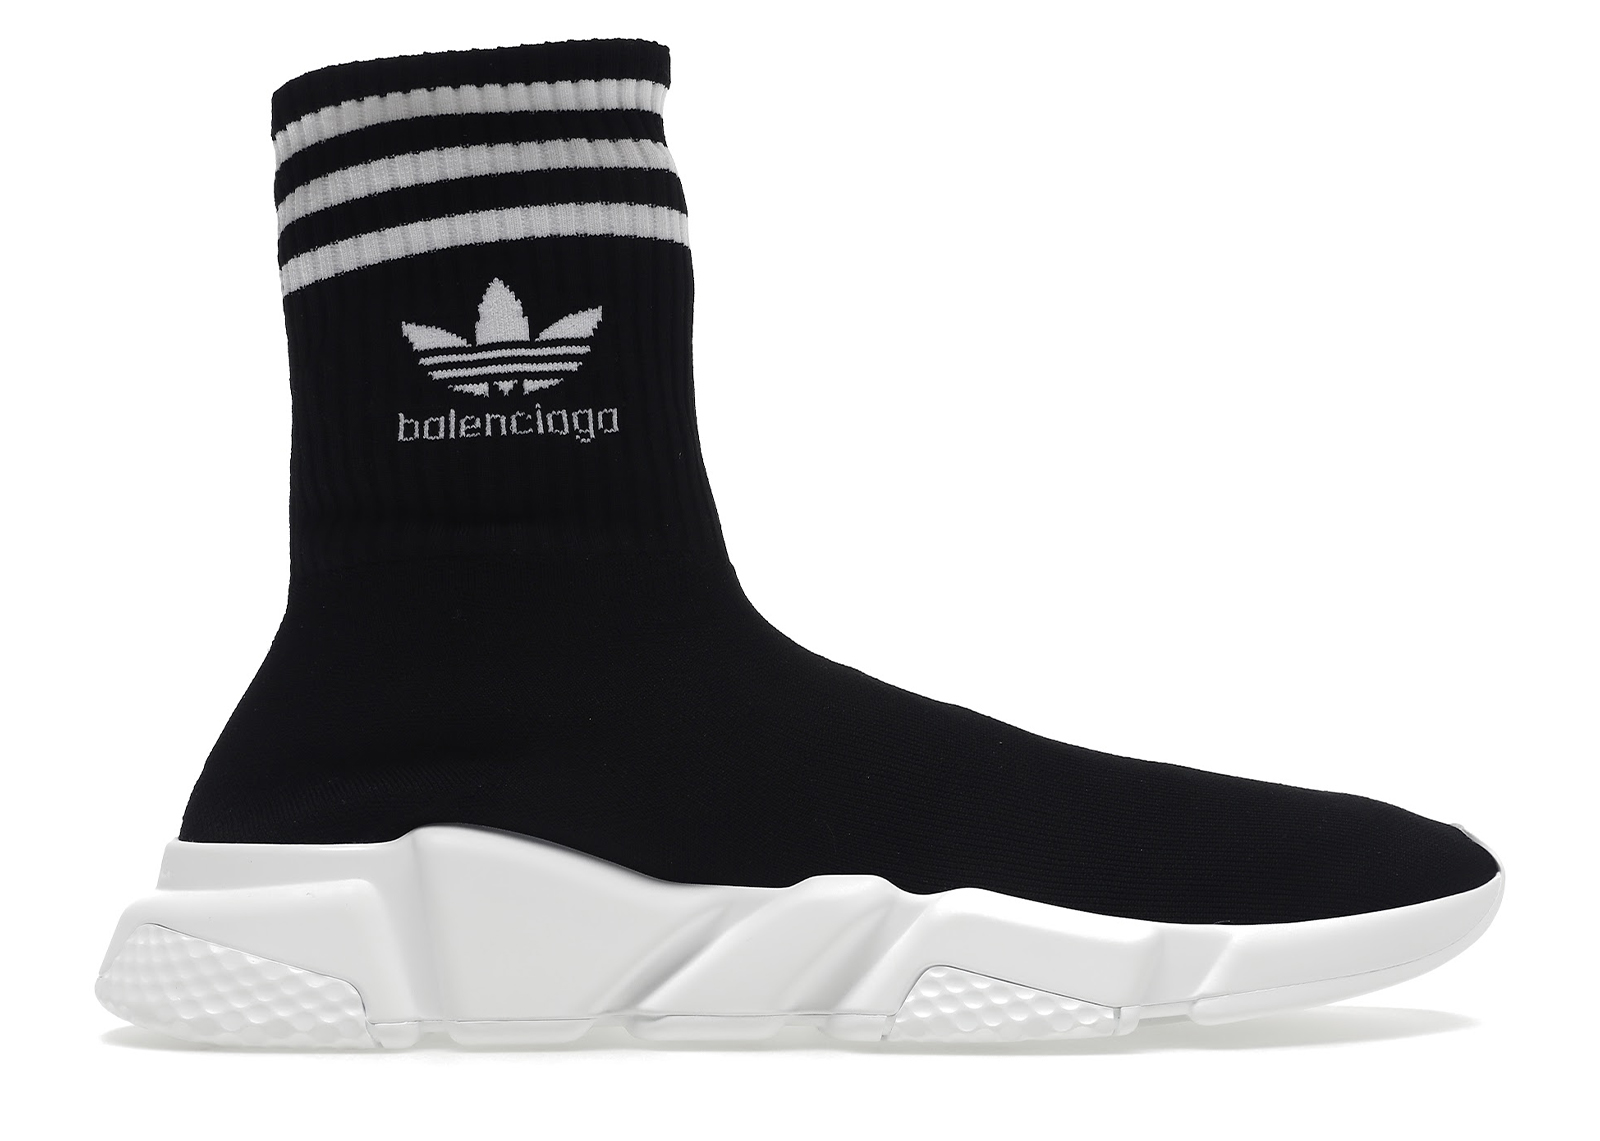 Balenciaga x Adidas Where to buy release date price and more explored  about apparel collection